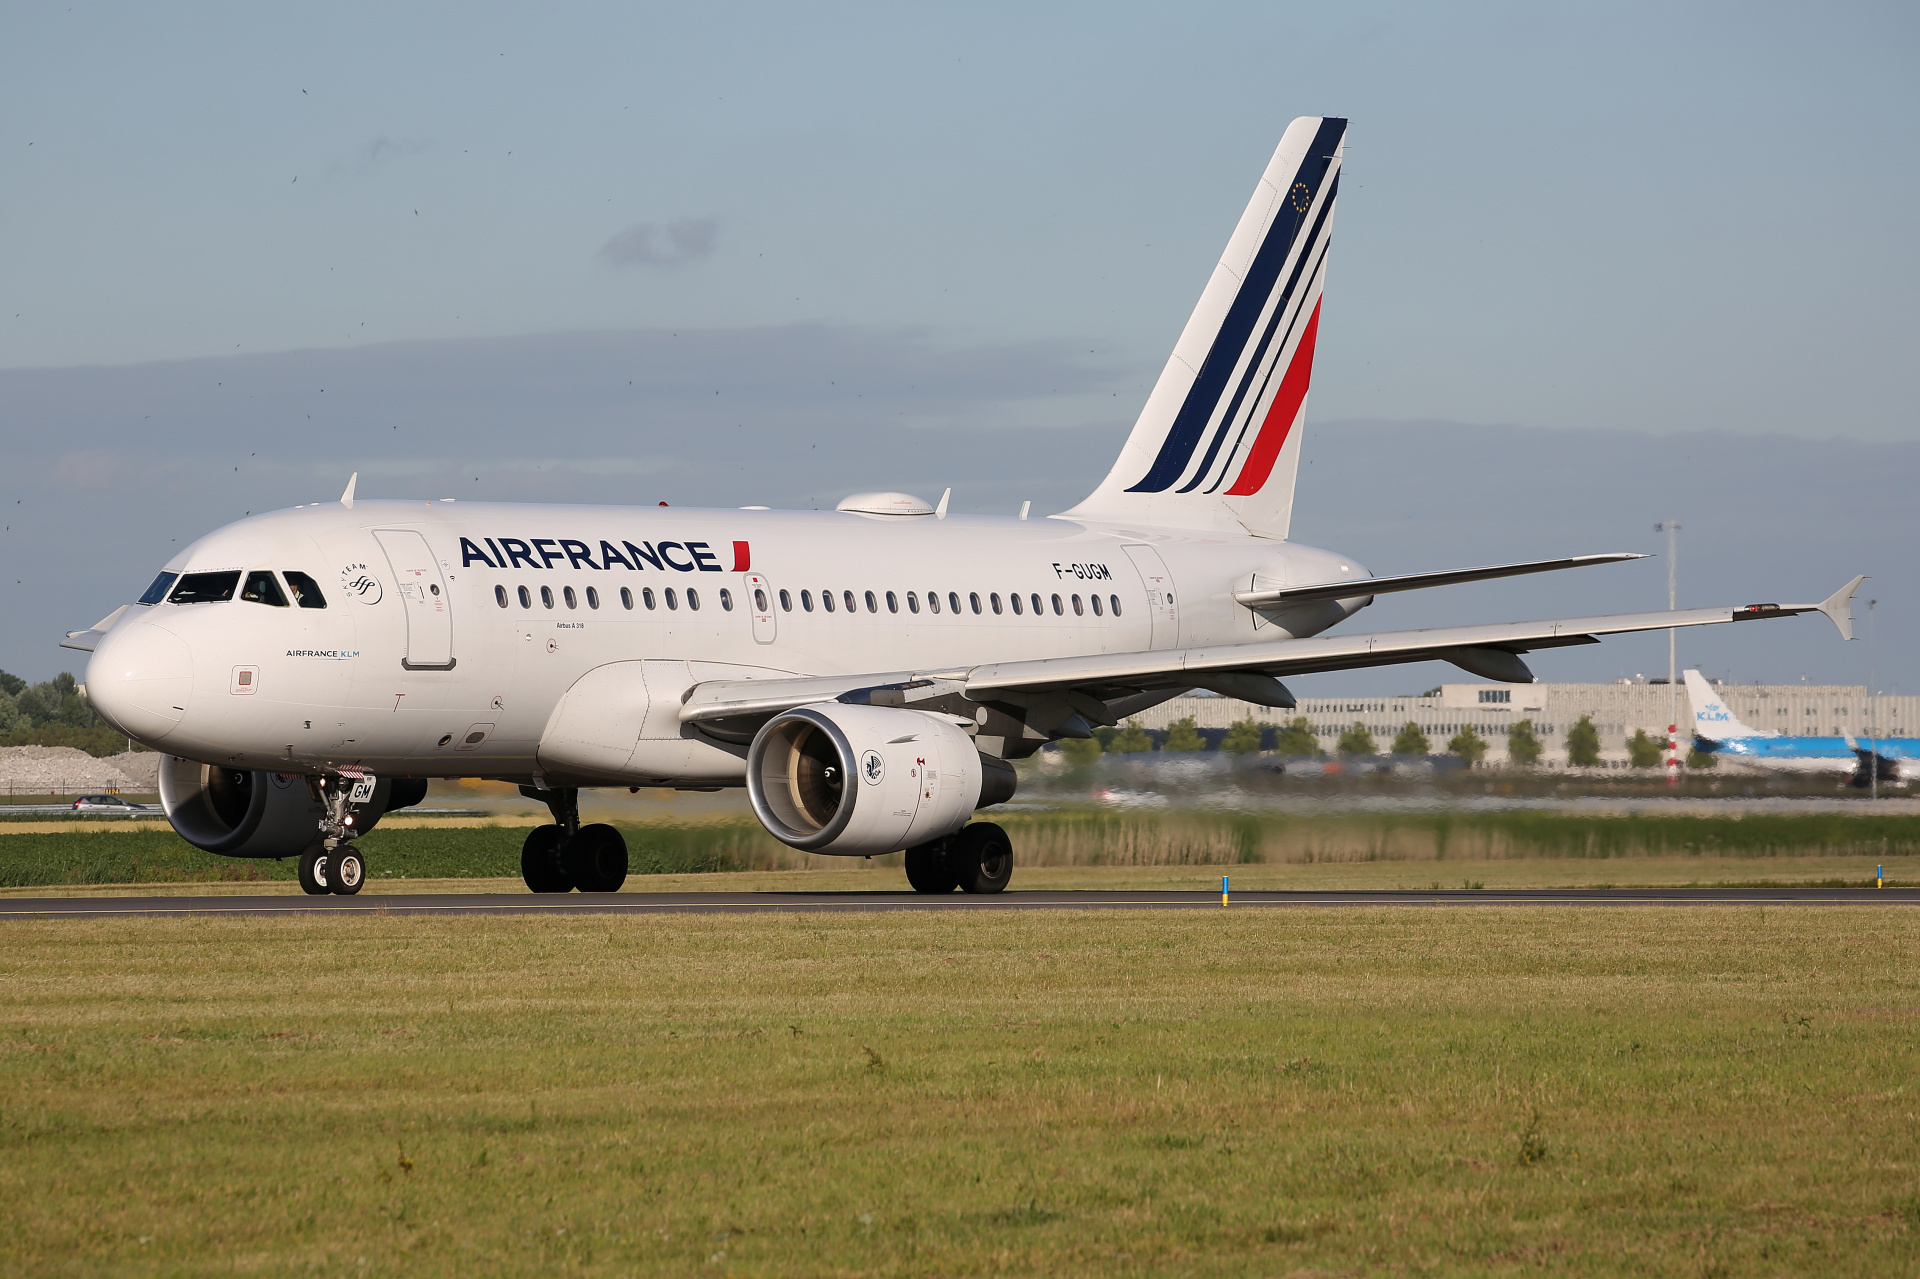 F-GUGM, Air France (Aircraft » Schiphol Spotting » Airbus A318-100)